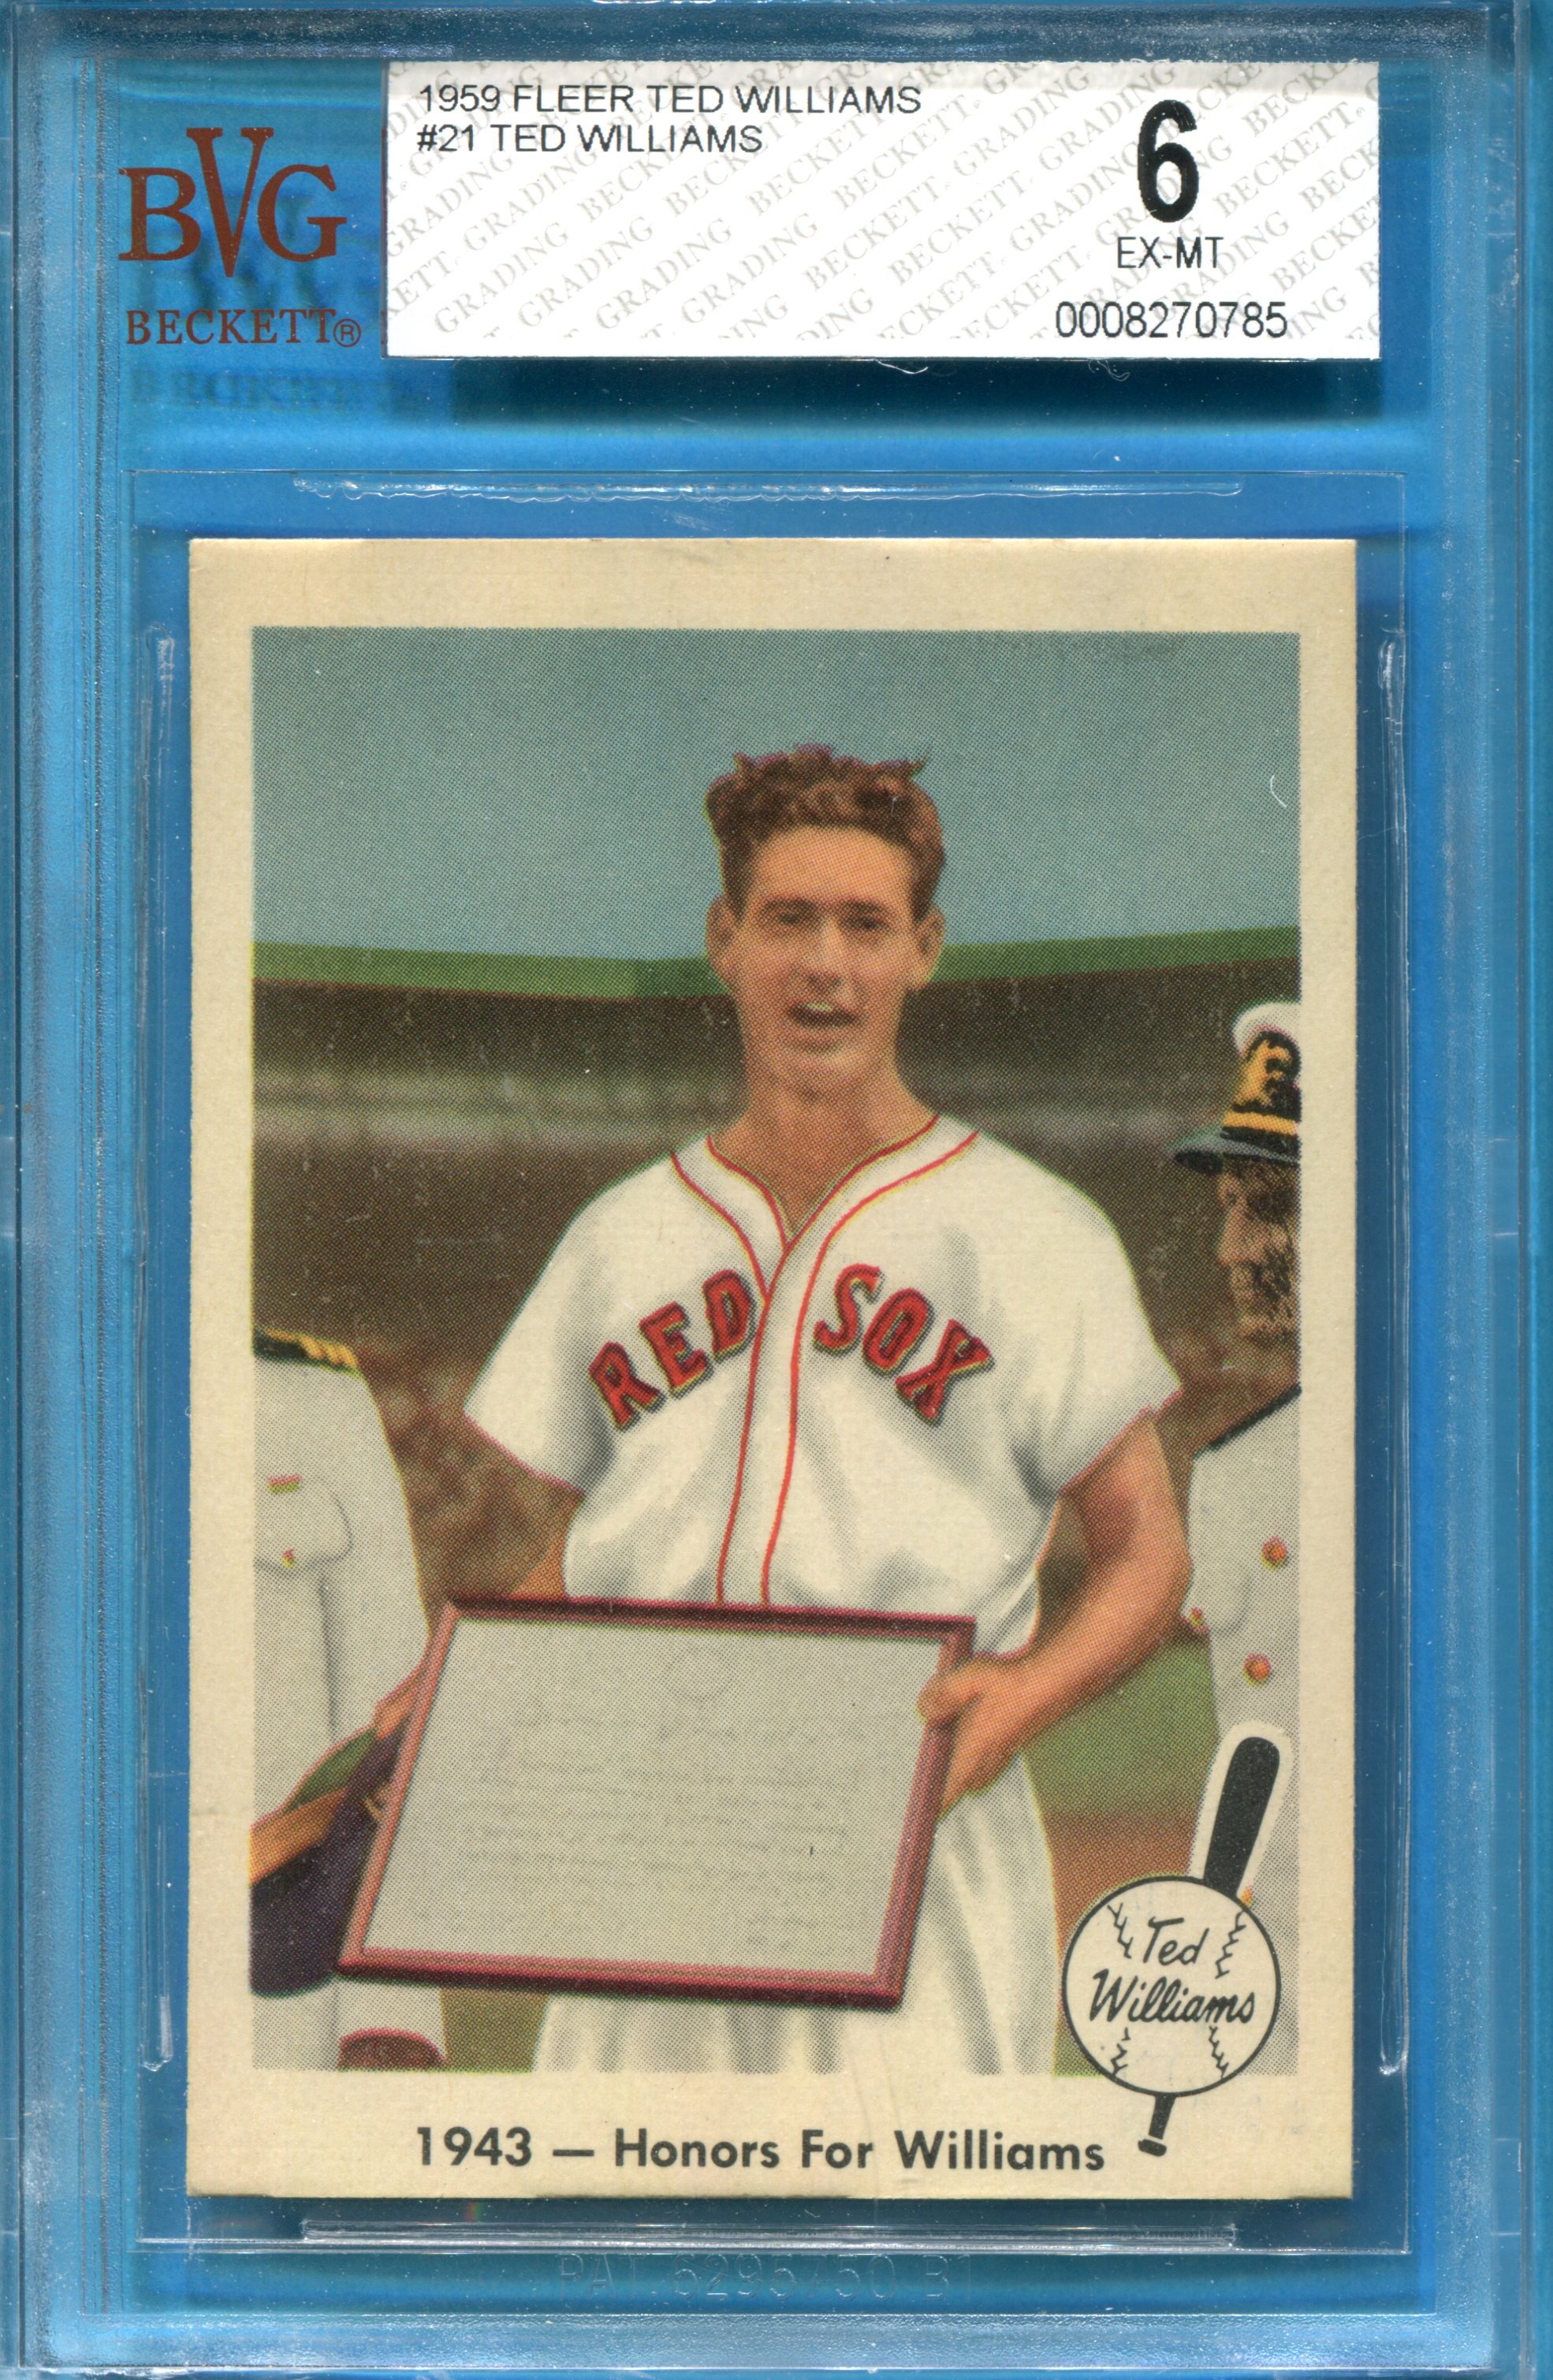 1959 Fleer Ted Williams #21 Honors for Williams